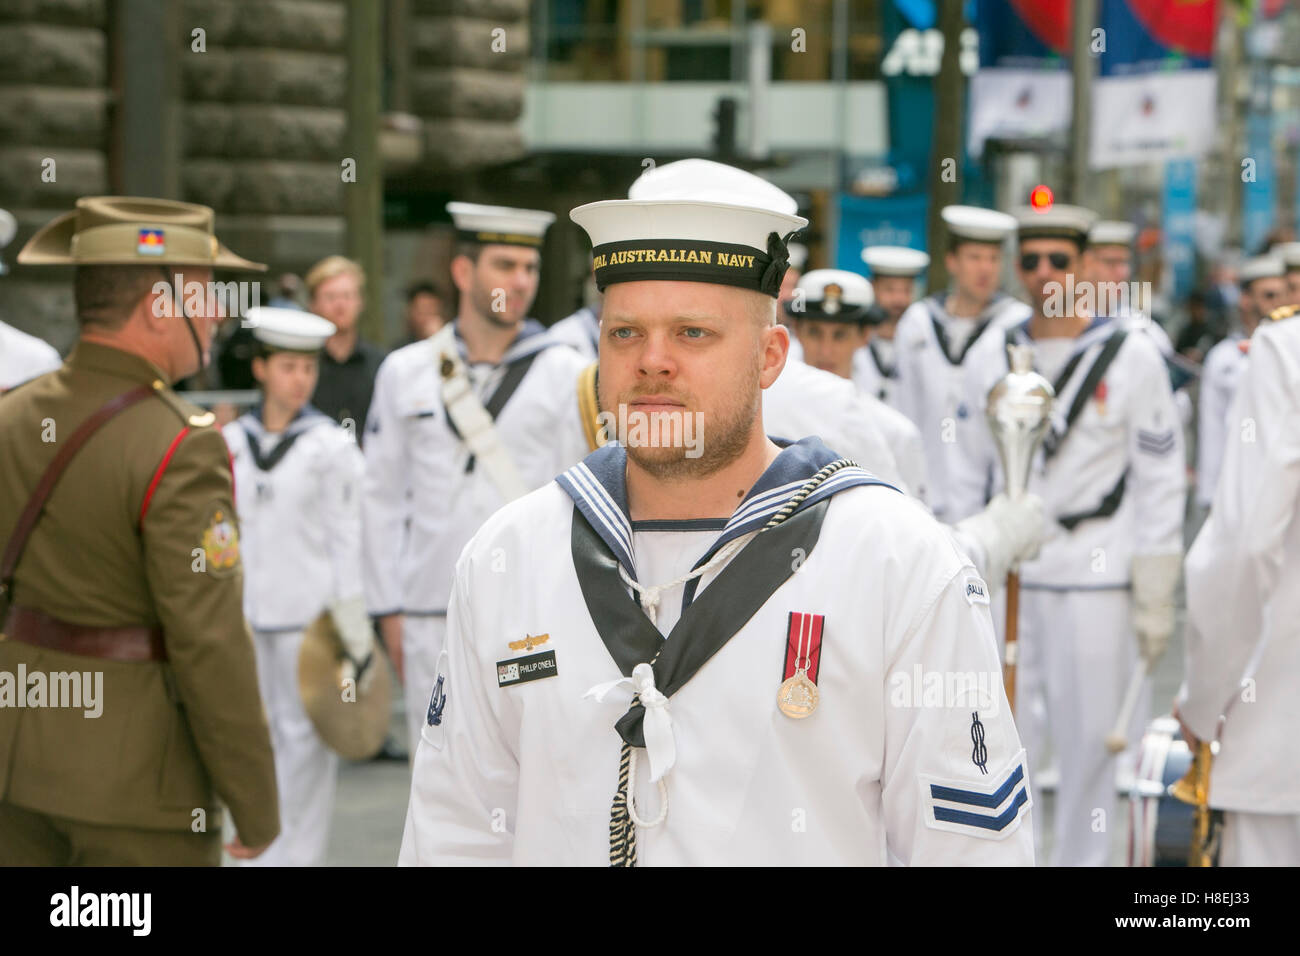 Royal Australian Navy band at the Remembrance Armistice Day service in Martin Place Sydney on 11th November 2016 Stock Photo